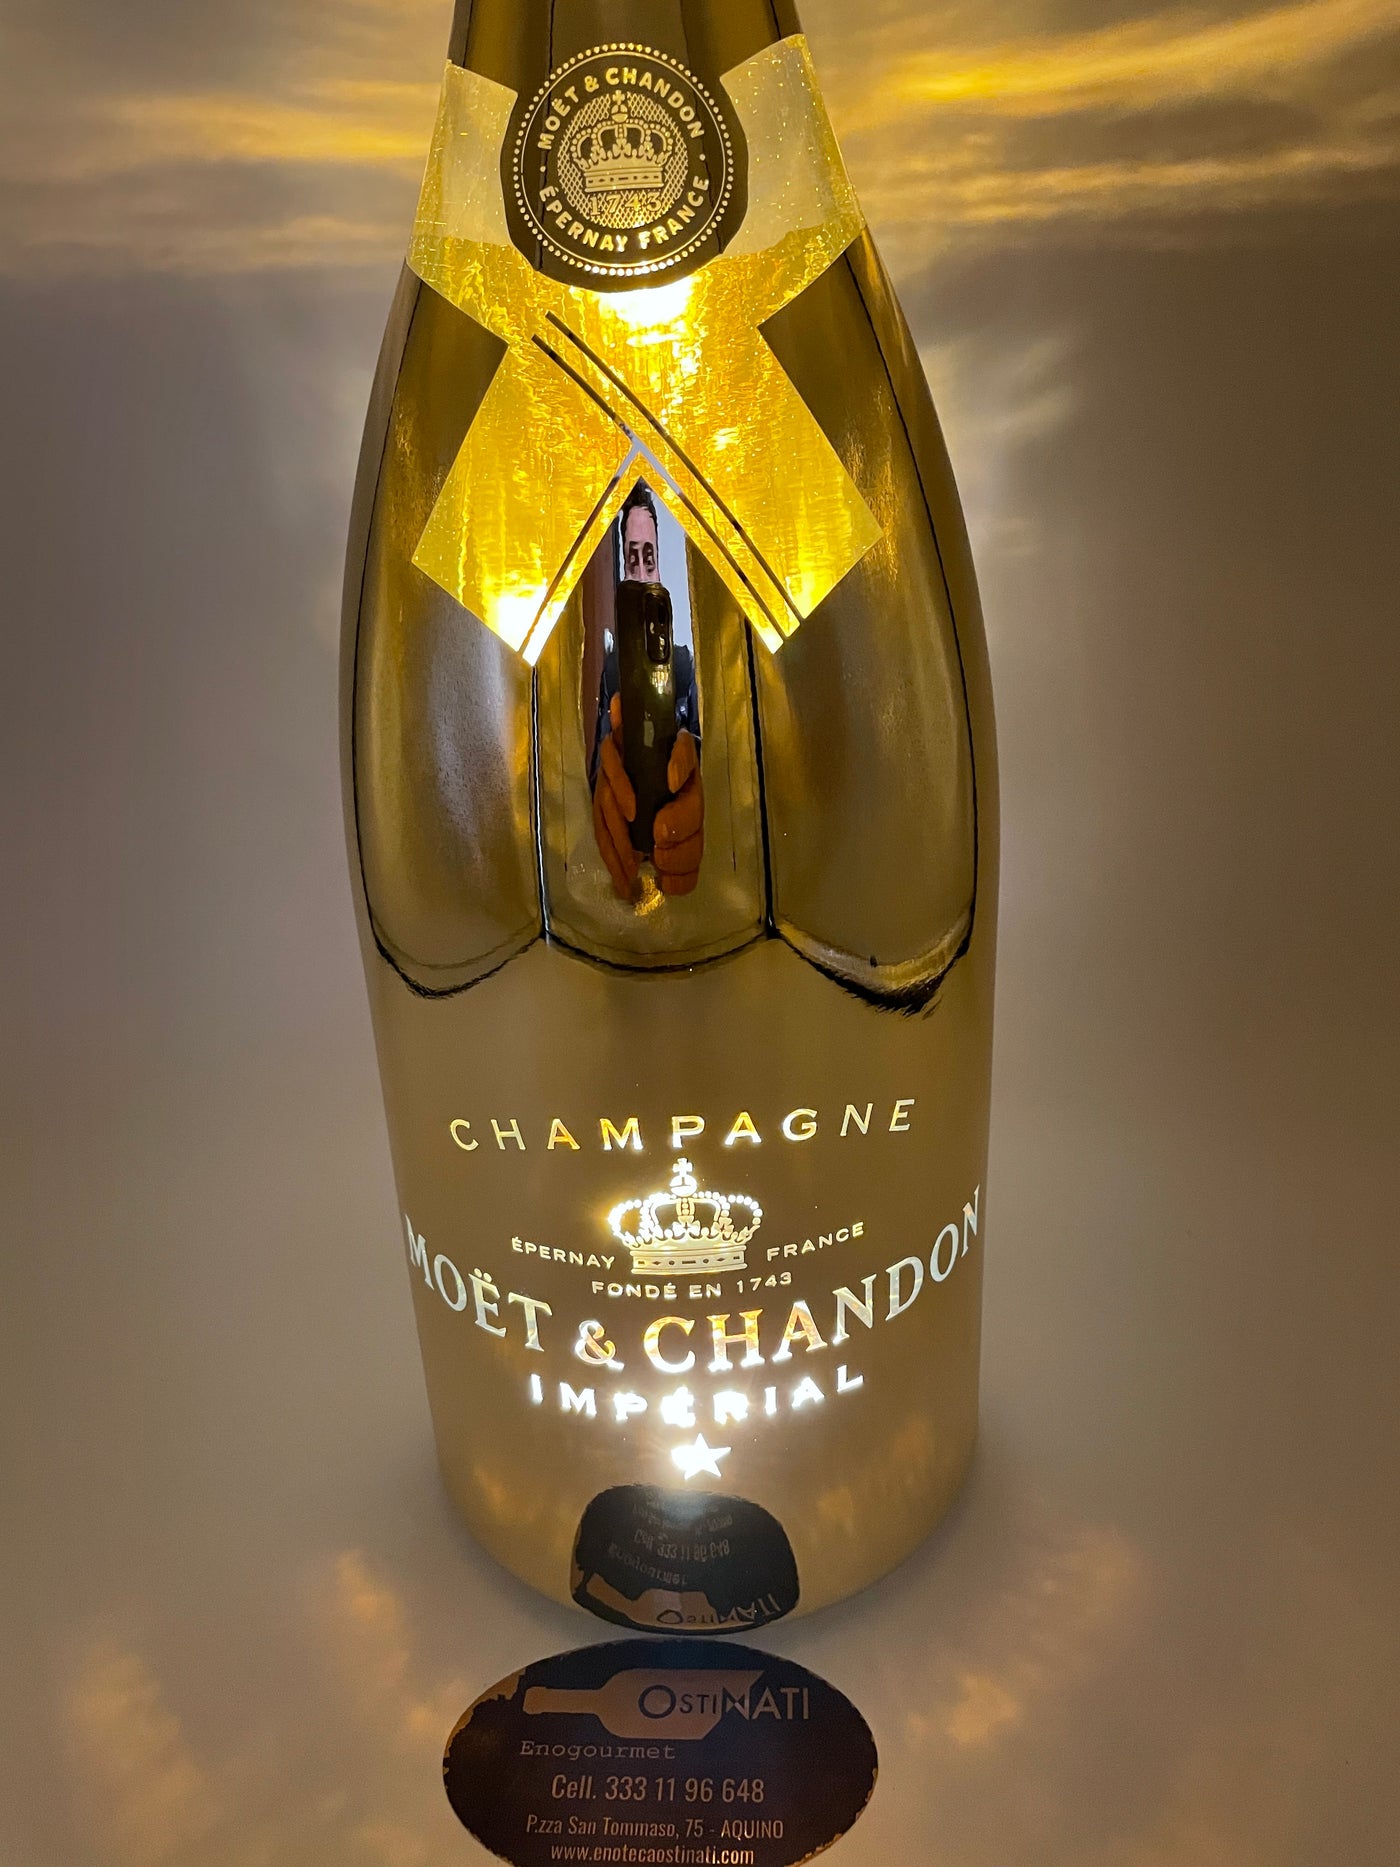 Moet & Chandon Bright Night Luminous Brut Imperial Champagne Price